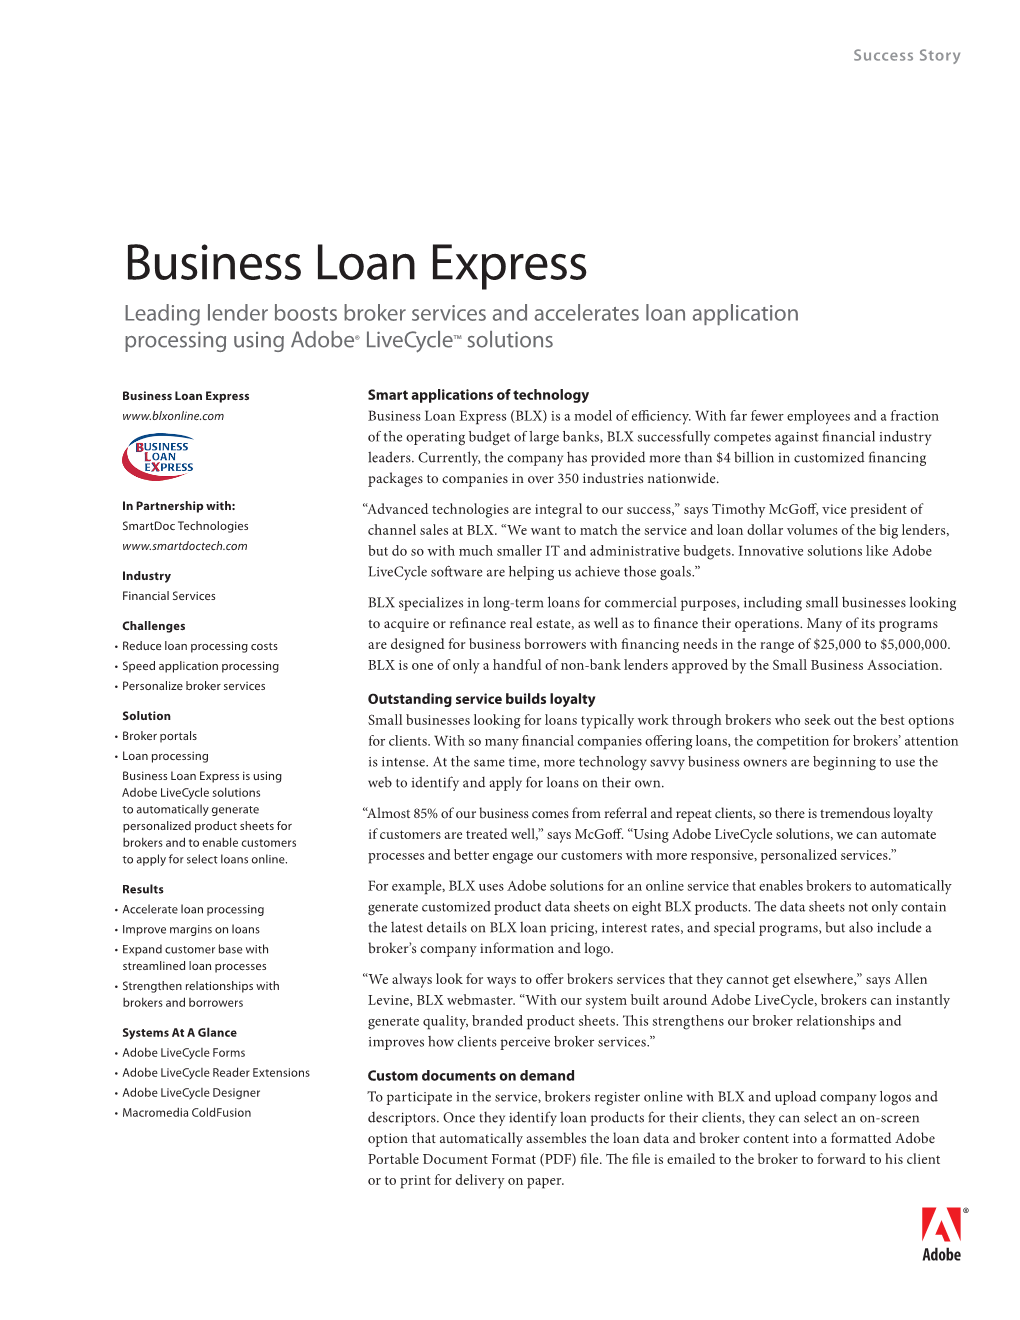 Business Loan Express Leading Lender Boosts Broker Services and Accelerates Loan Application Processing Using Adobe® Livecycle™ Solutions